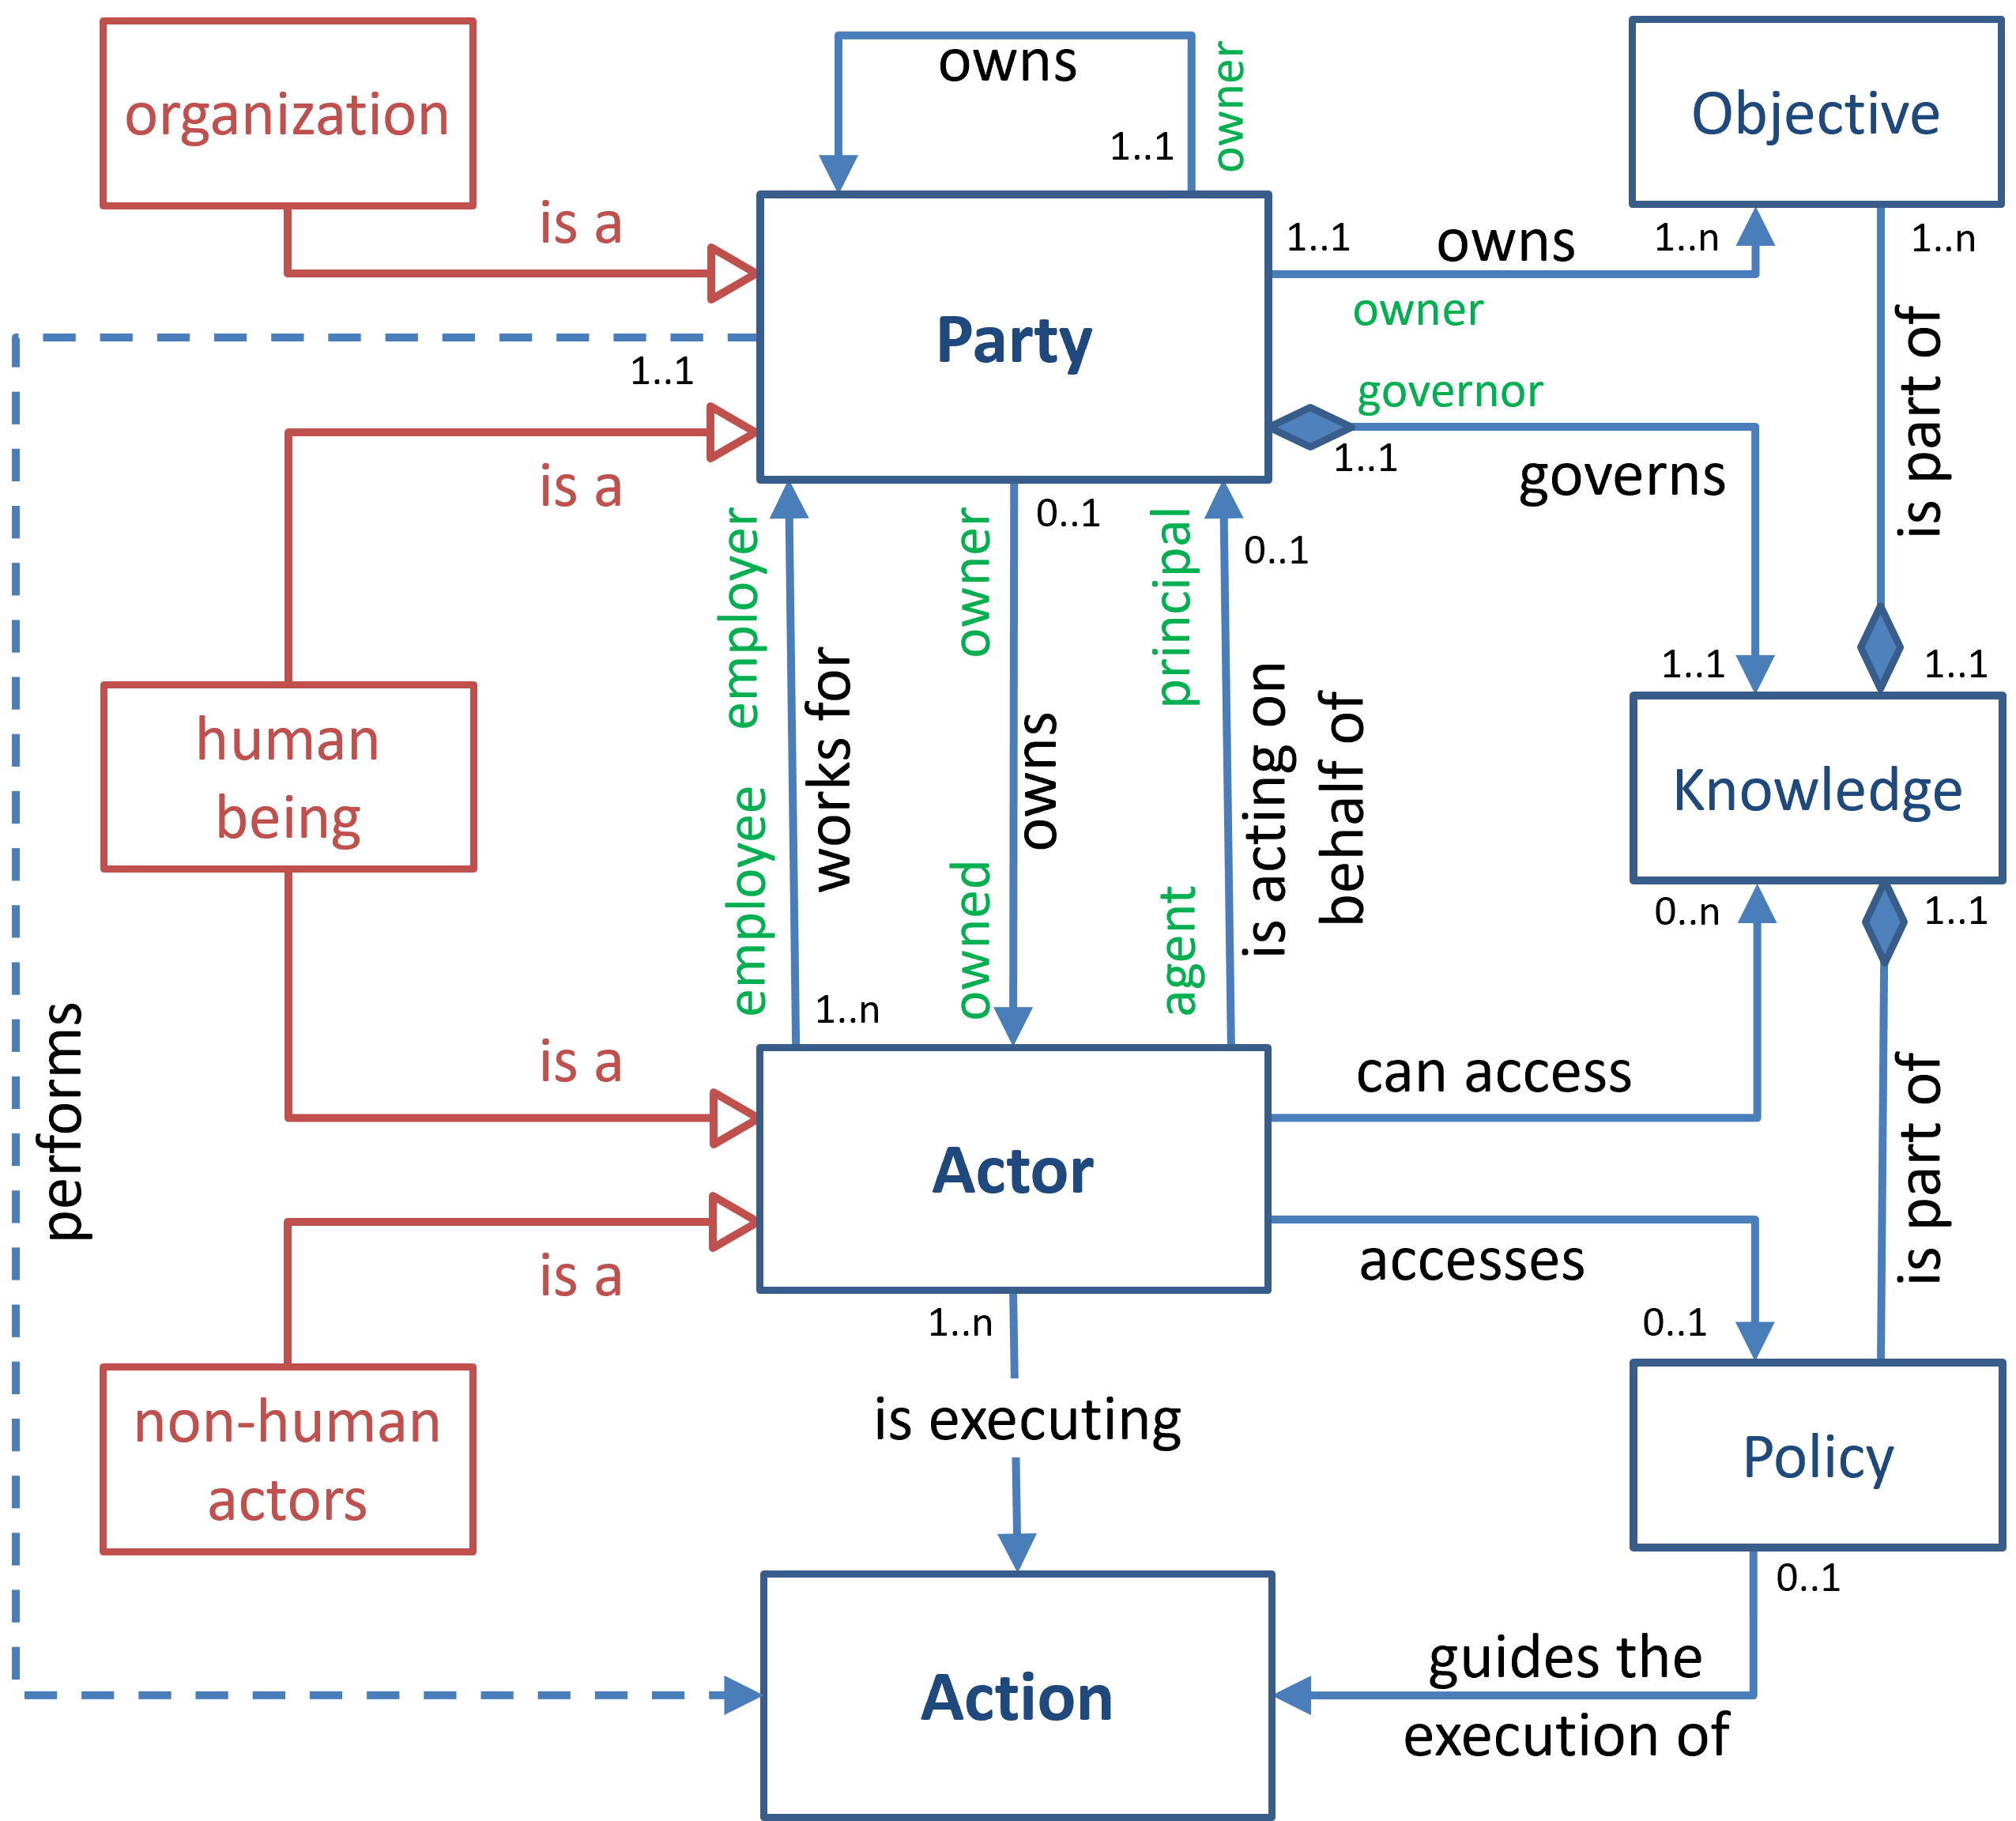 Conceptual model of the 'Party-Actor-Action' pattern